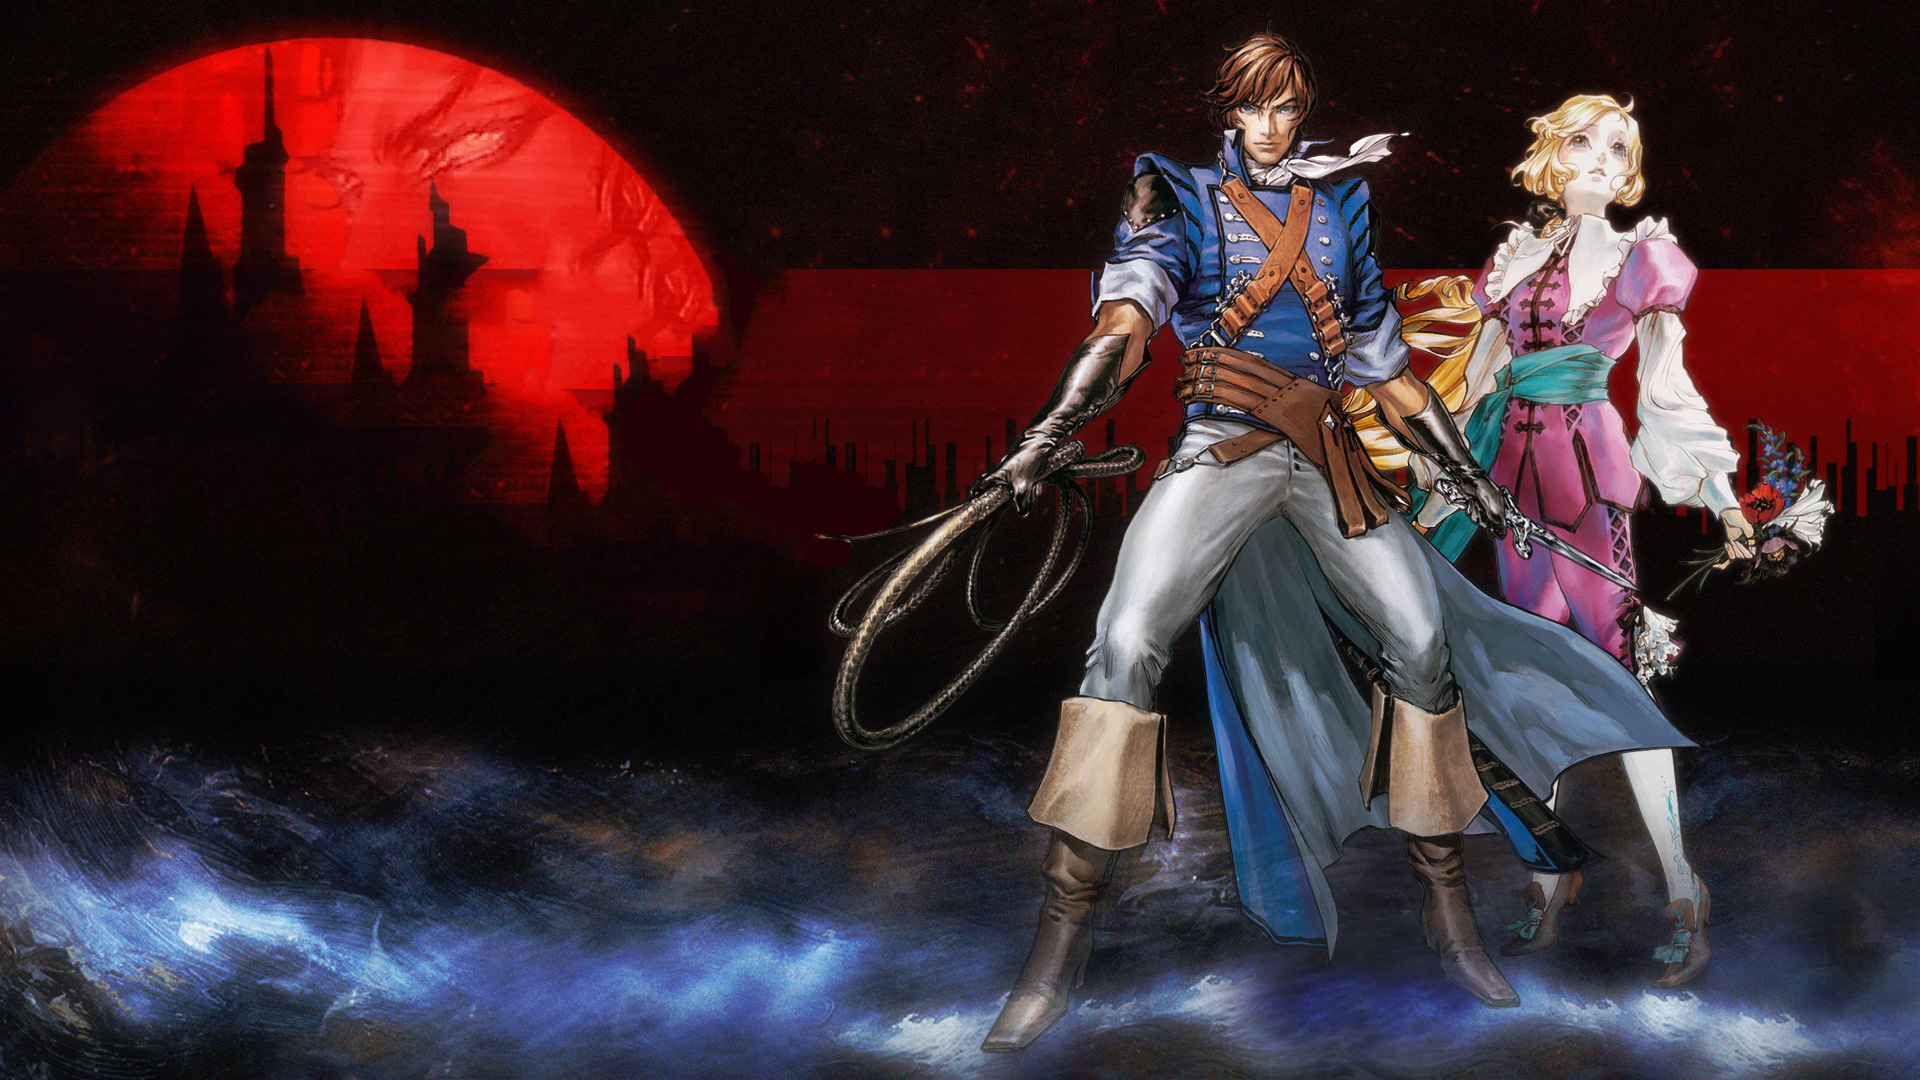 Castlevania: The Dracula X Chronicles Details - LaunchBox Games Database